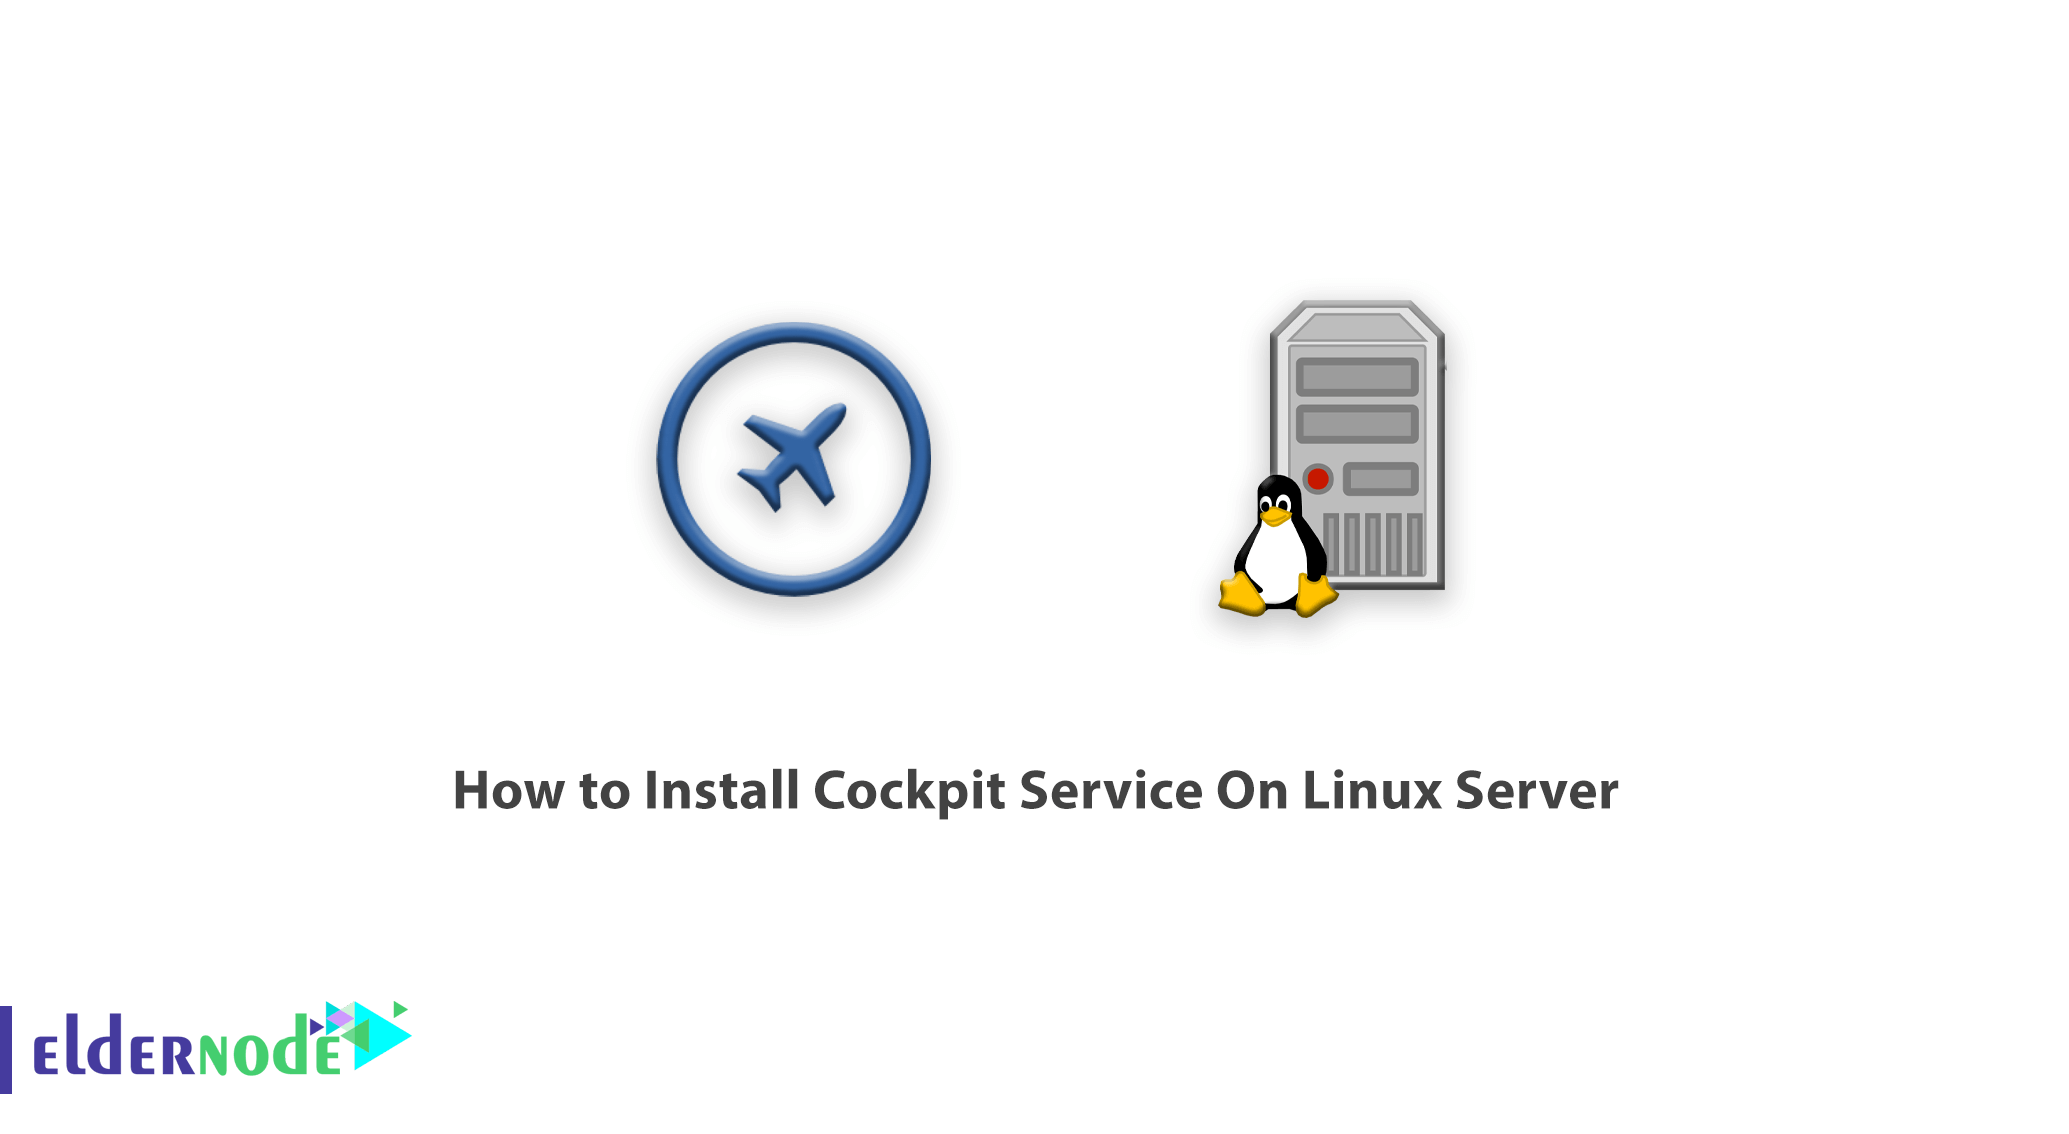 How to Install Cockpit Service On Linux Server